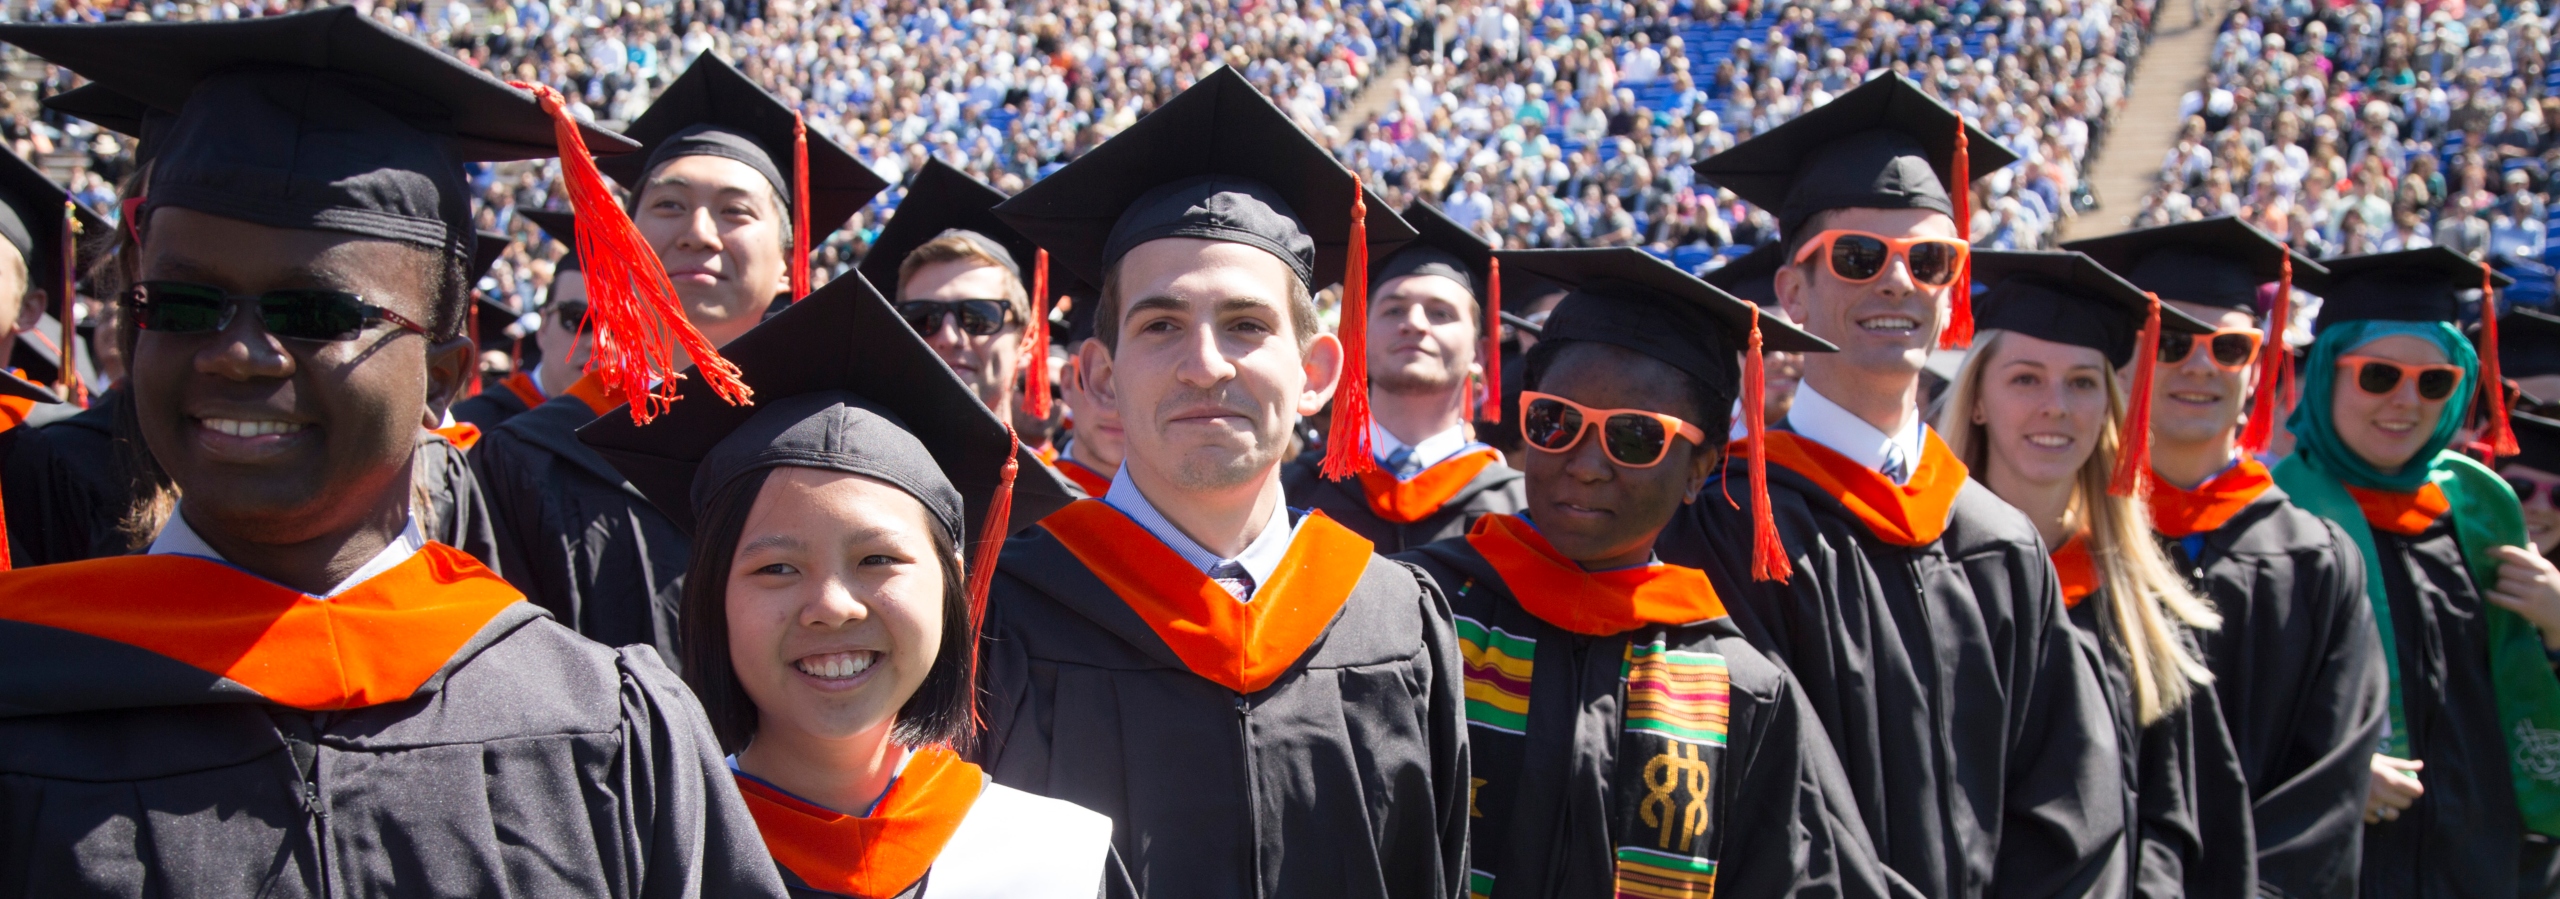 Duke Engineering graduates in cap and gown